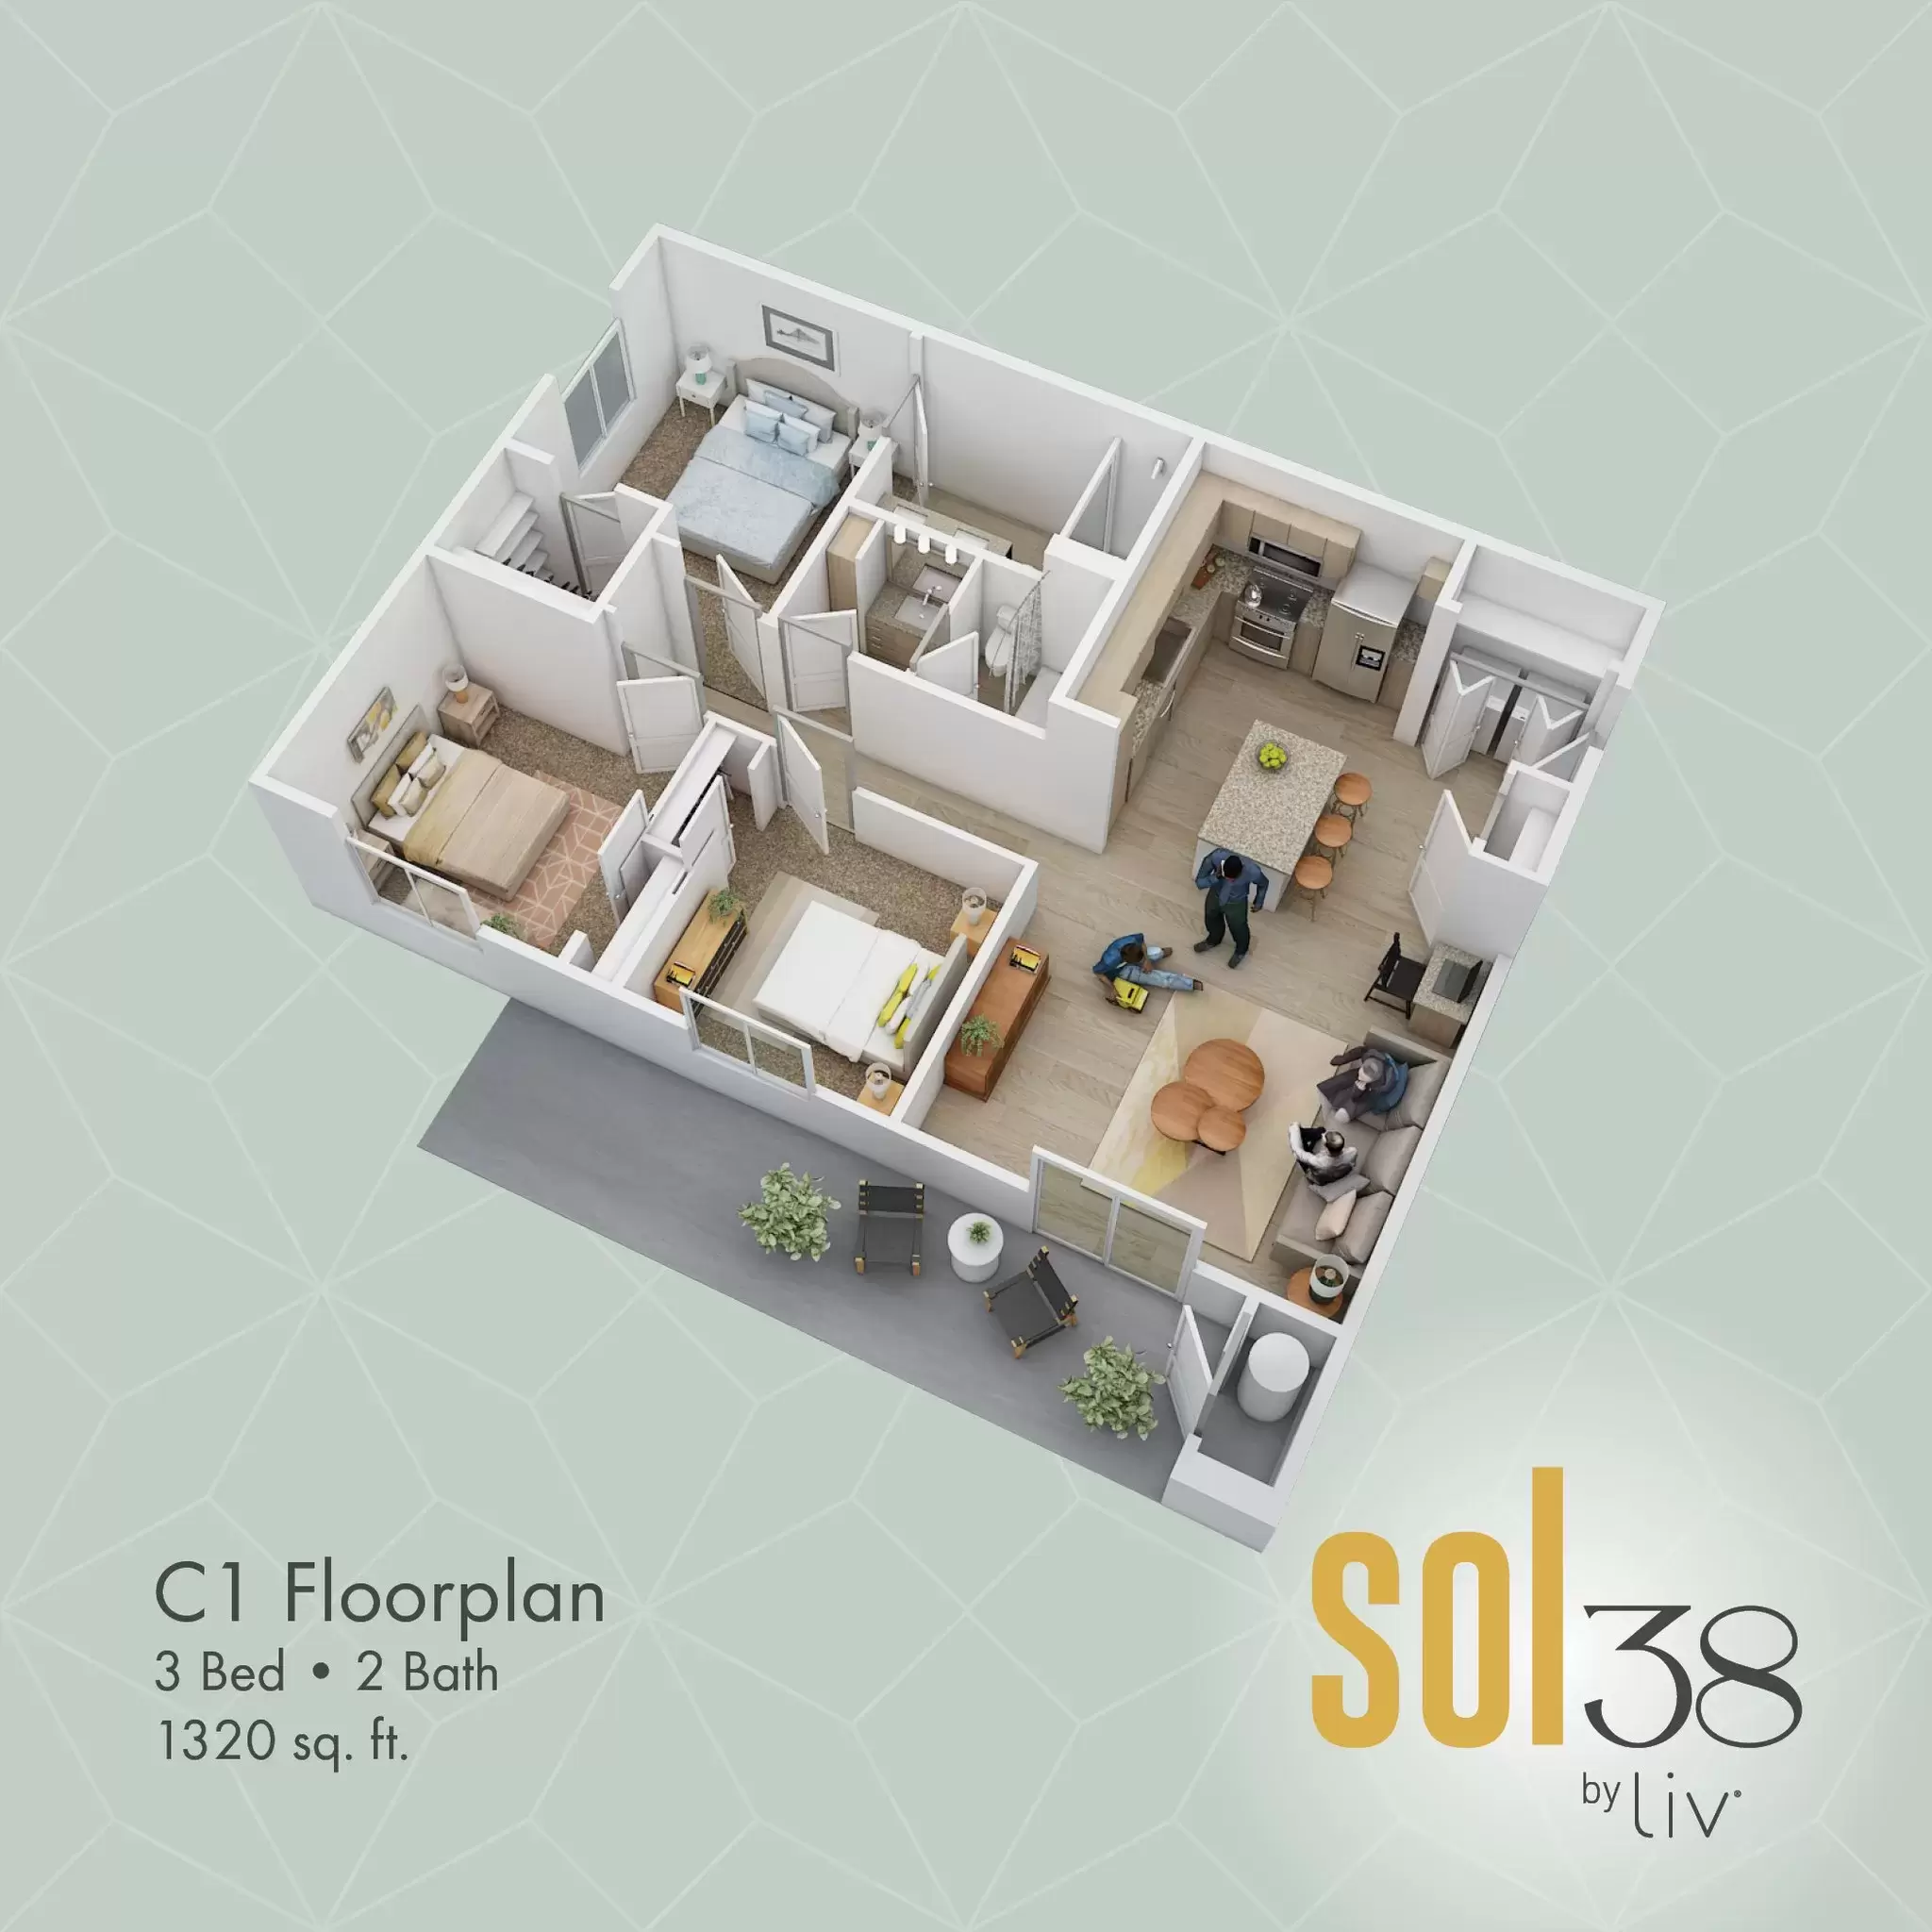 Triple the bedrooms means triple the luxury. 😍

This 3-bedroom, 2-bath residence comes complete with countertop seating, ample storage space, and high-end finishes. Visit our website and explore all of our floor plans! ➡ www.sol38byliv.com